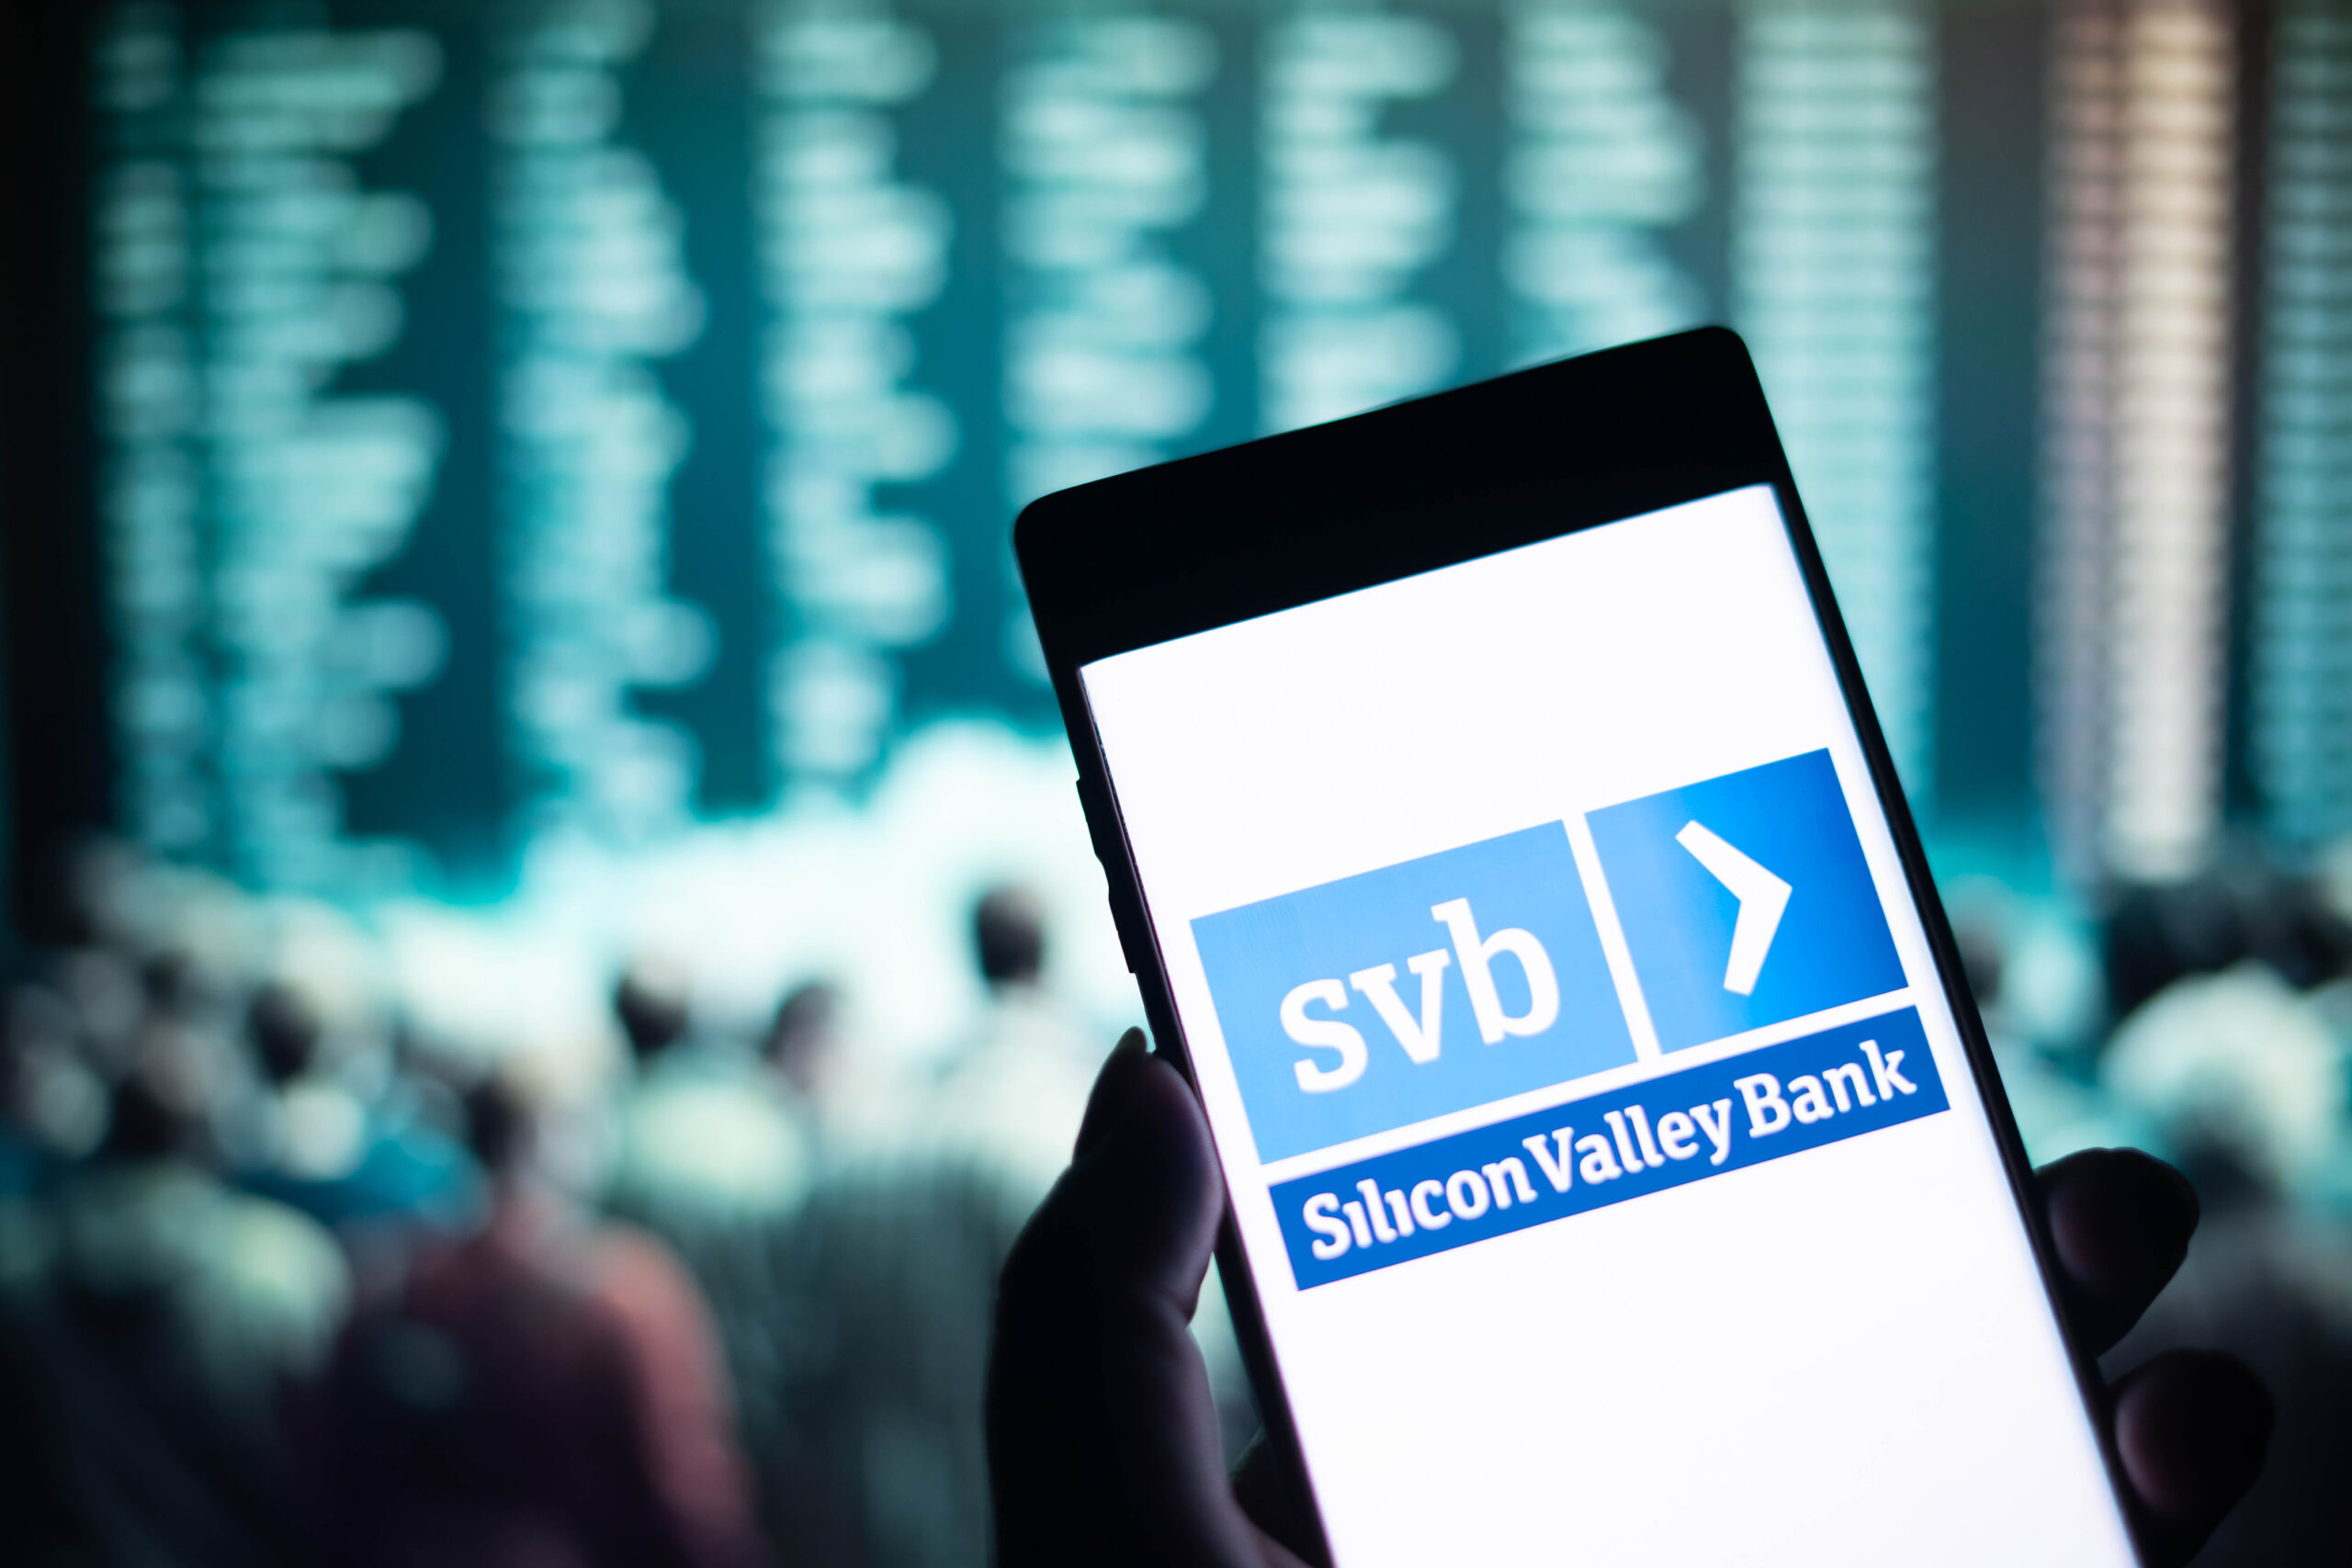 The Silicon Valley Bank logo appears on a smart phone held in a hand -- in the background is blurred out financial charts.